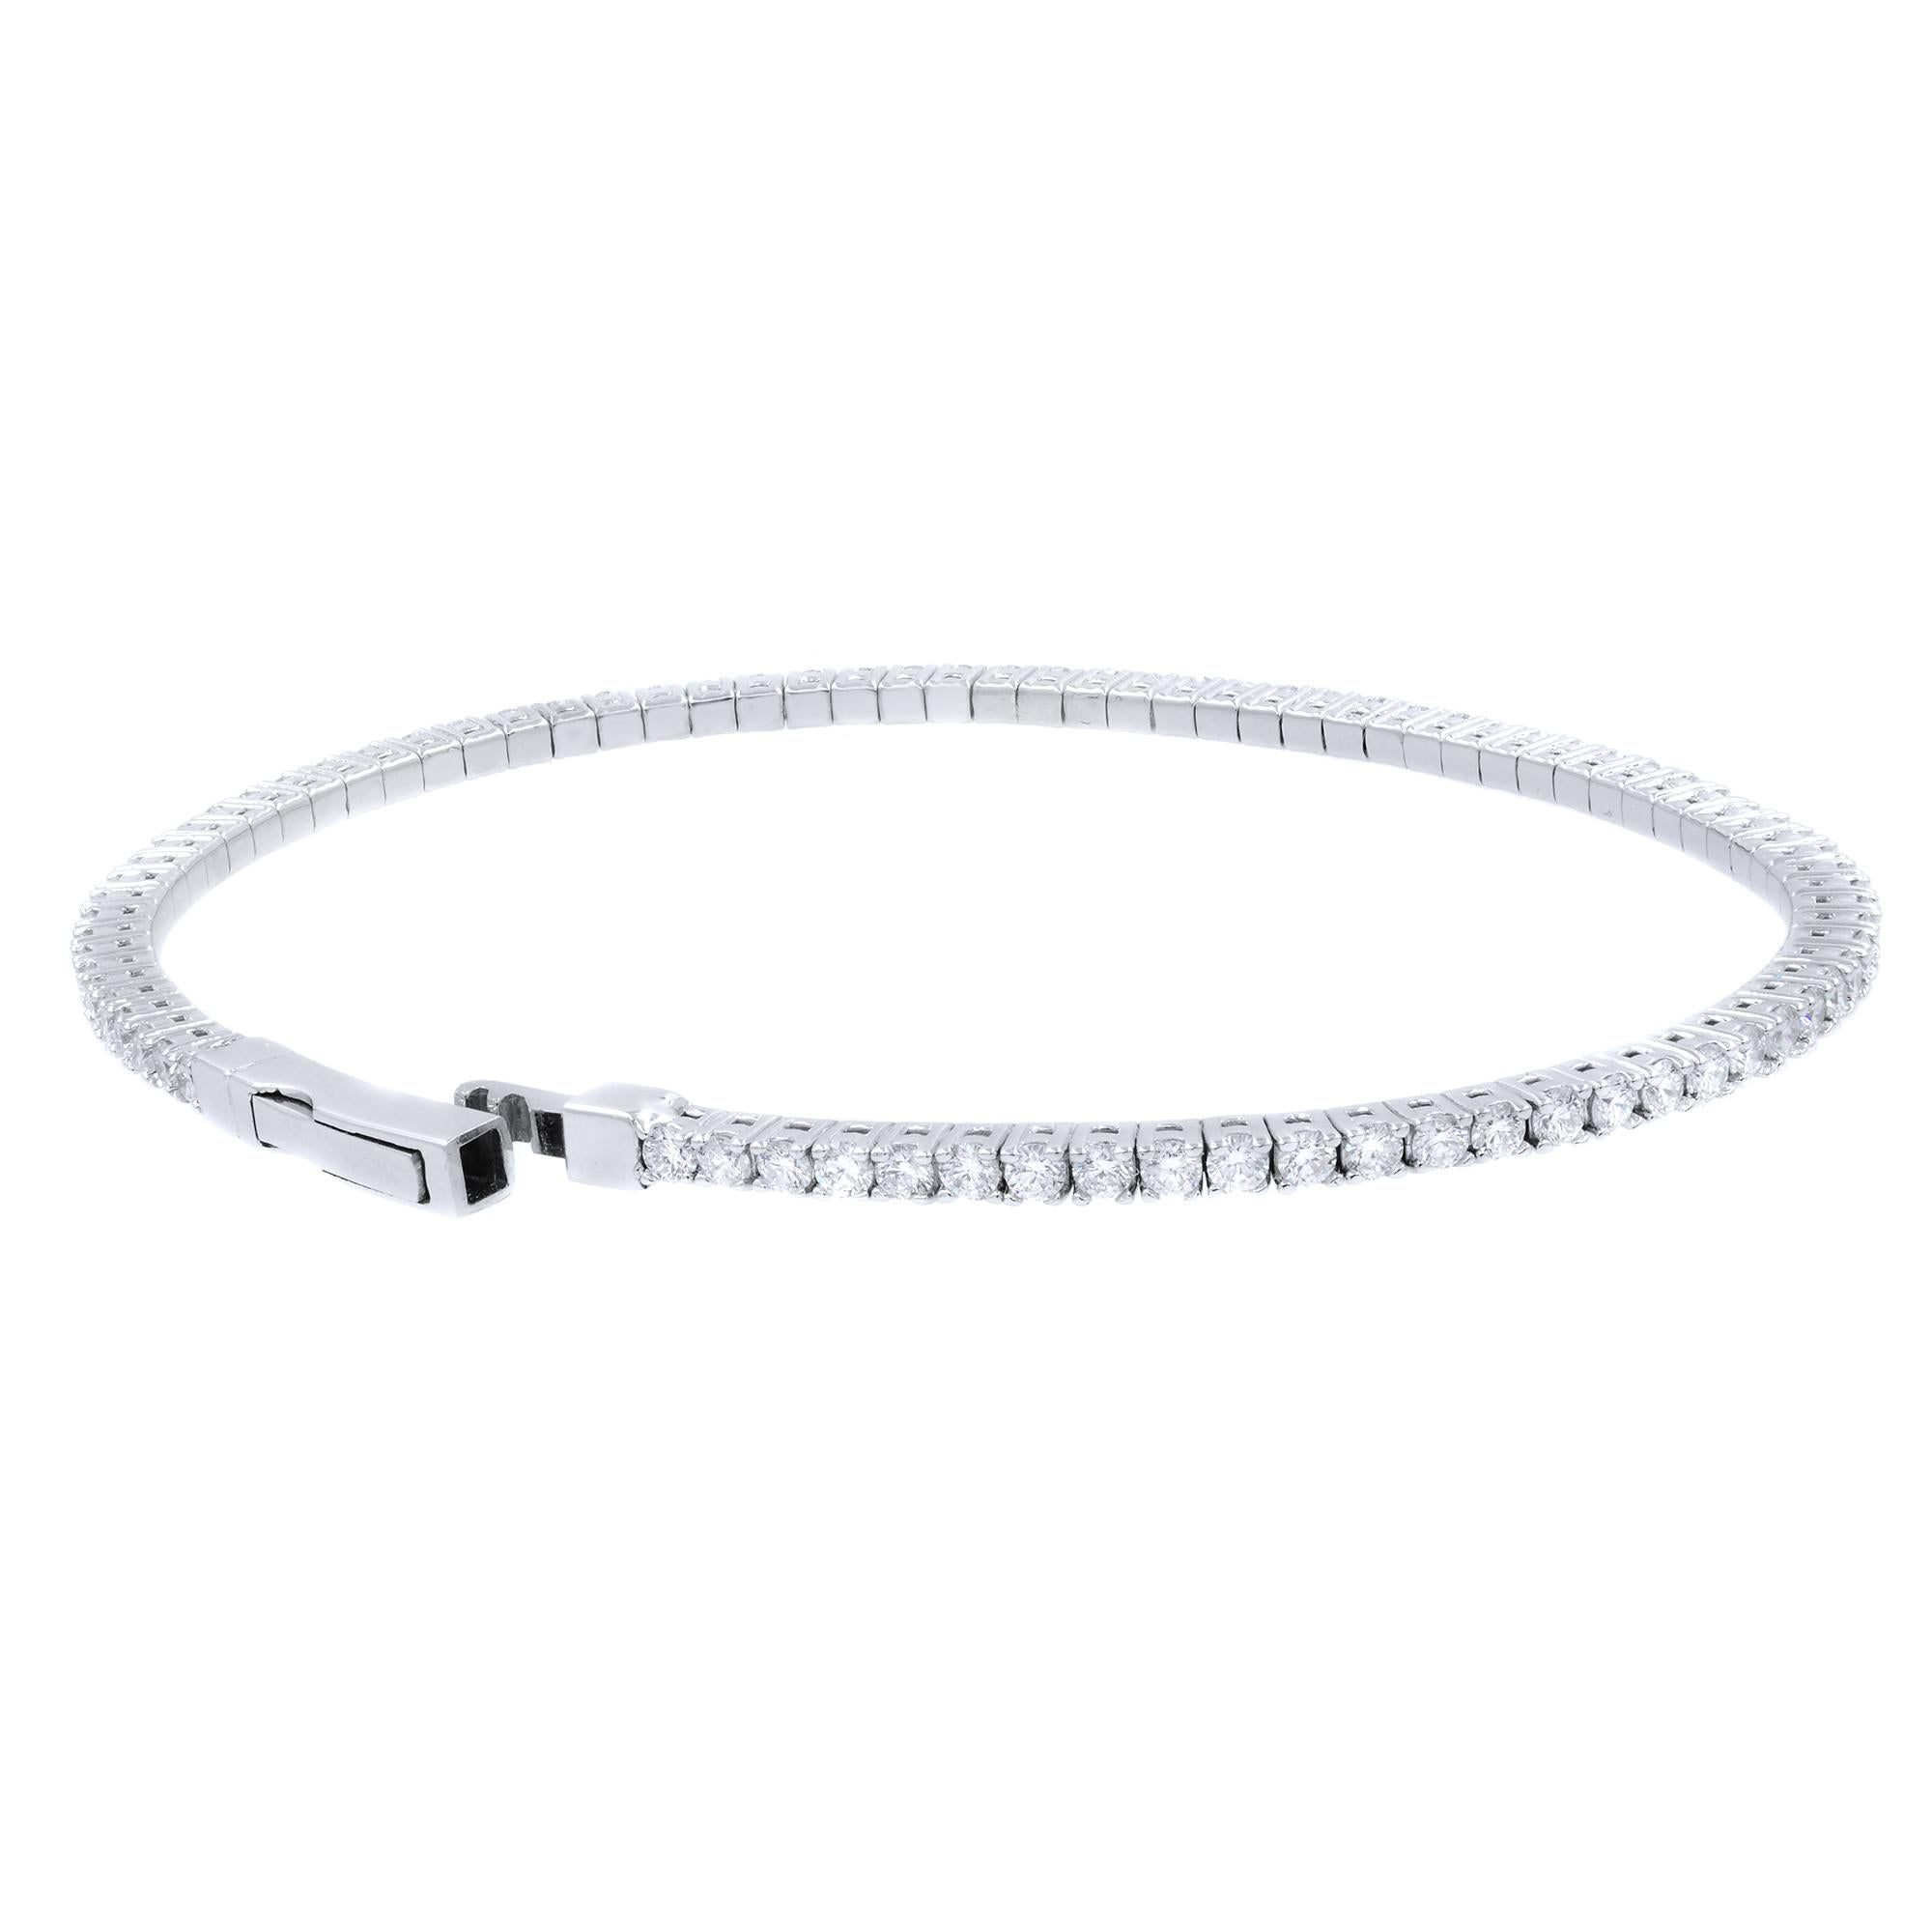 A classic look with easy elegance, this diamond bangle exudes sophistication. One stunning flexible bangle bracelet in 14K white gold, prong-set with fine white diamonds with a total weight of 2.00cts. The bangle measures 2.1mm in width and weighs 7